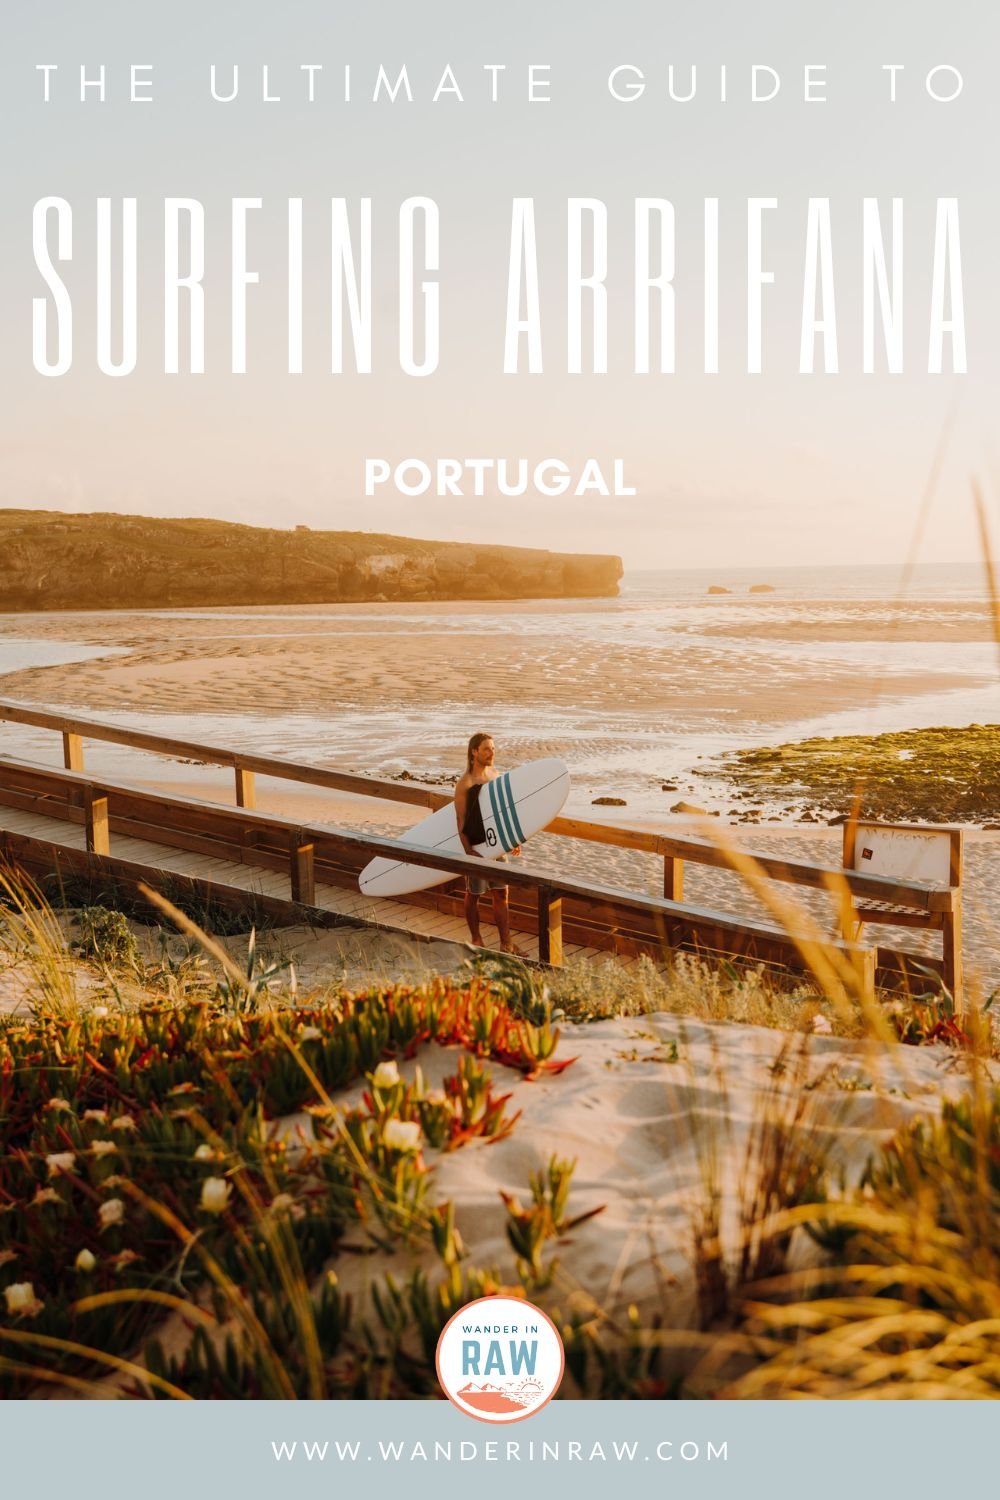 The Ultimate Guide to Surfing at Arrifana, Portugal